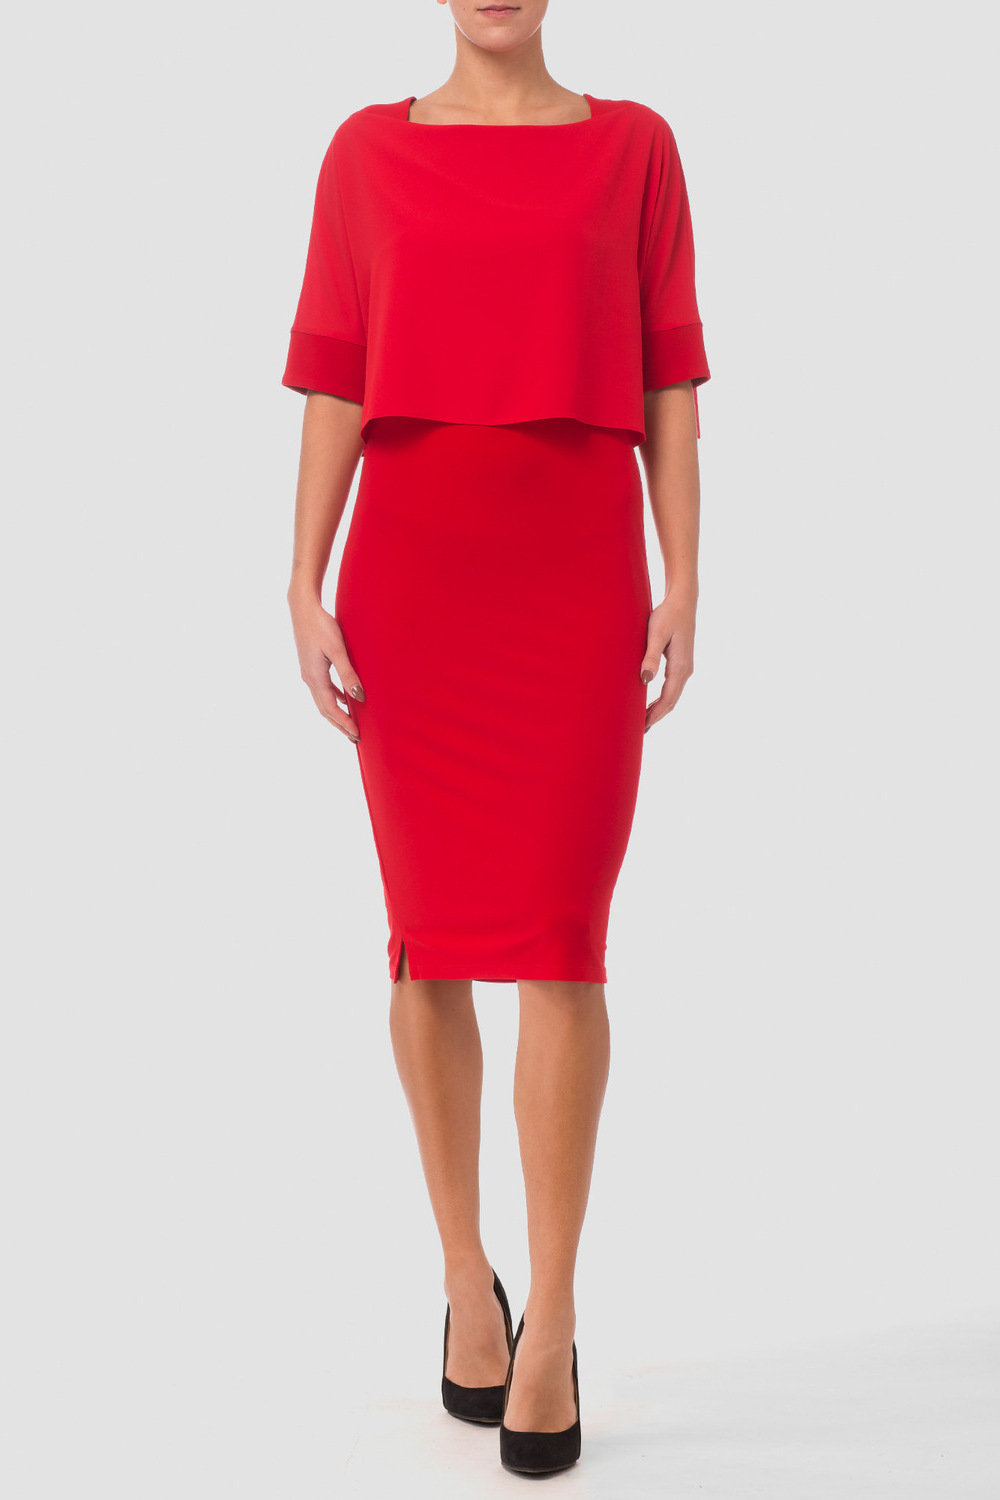 Joseph Ribkoff robe style 181256. Rouge A Levres 173